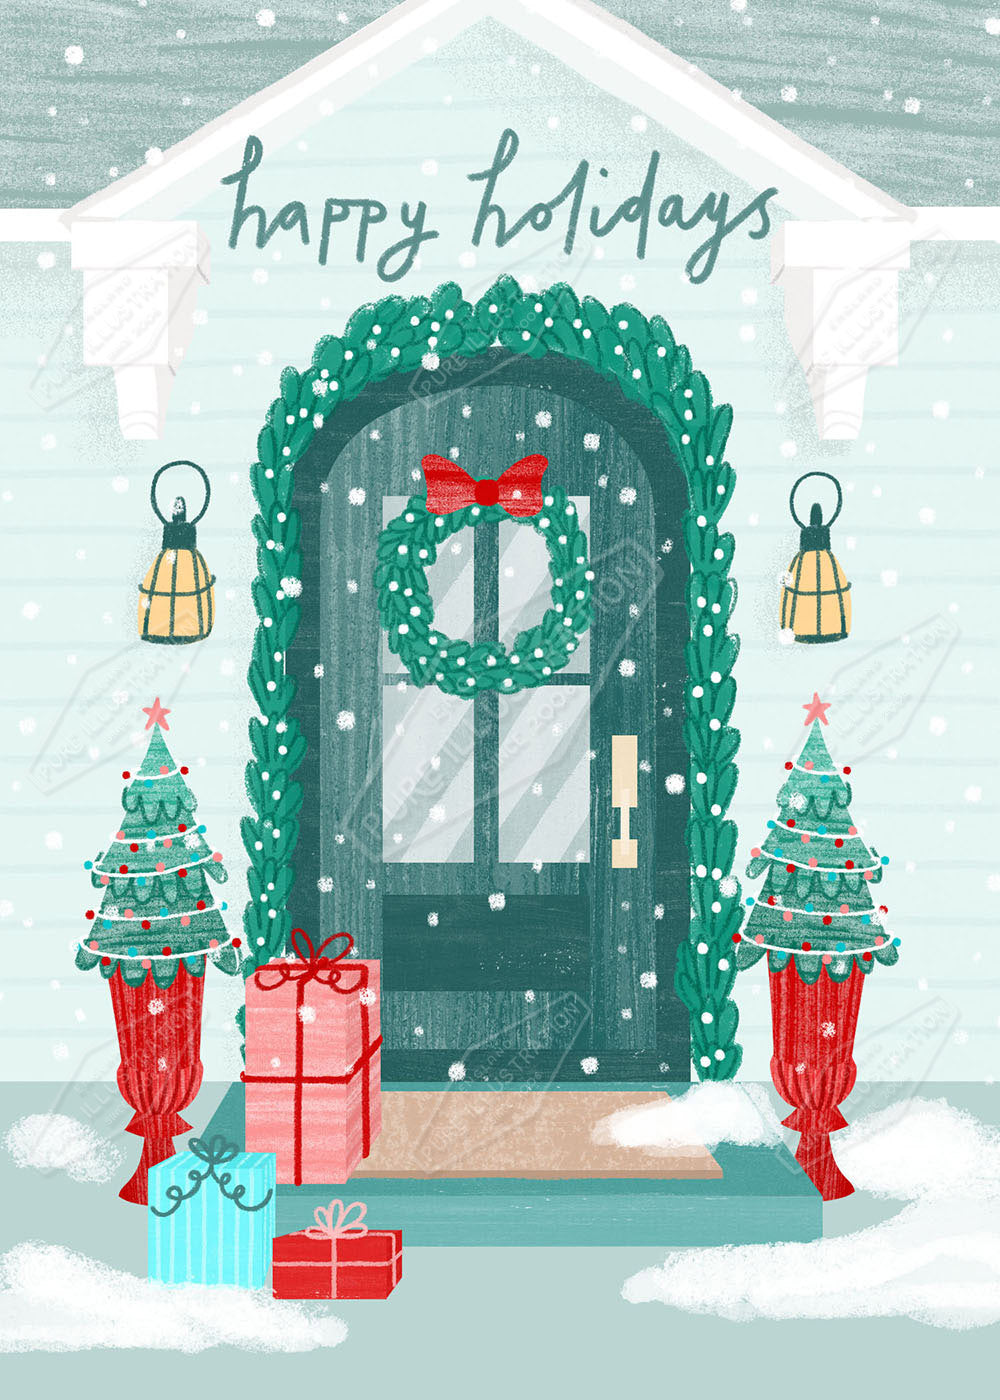 00034997LBR- Leah Brideaux is represented by Pure Art Licensing Agency - Christmas Greeting Card Design